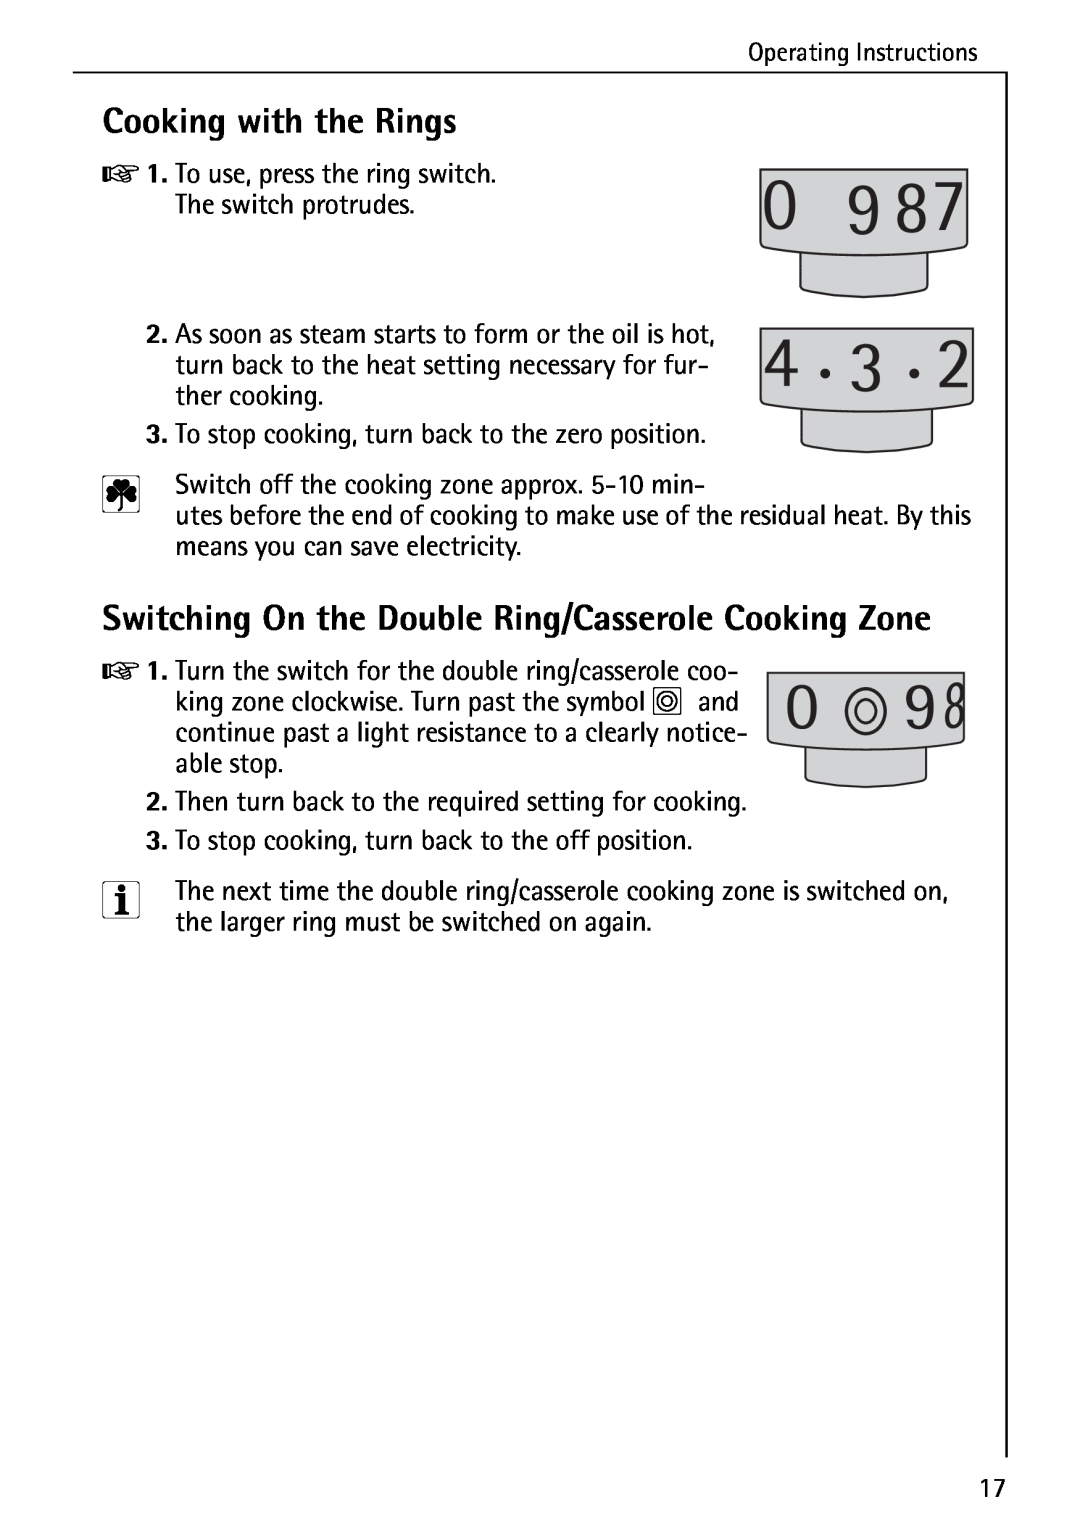 AEG 5033 V operating instructions Cooking with the Rings, Switching On the Double Ring/Casserole Cooking Zone 